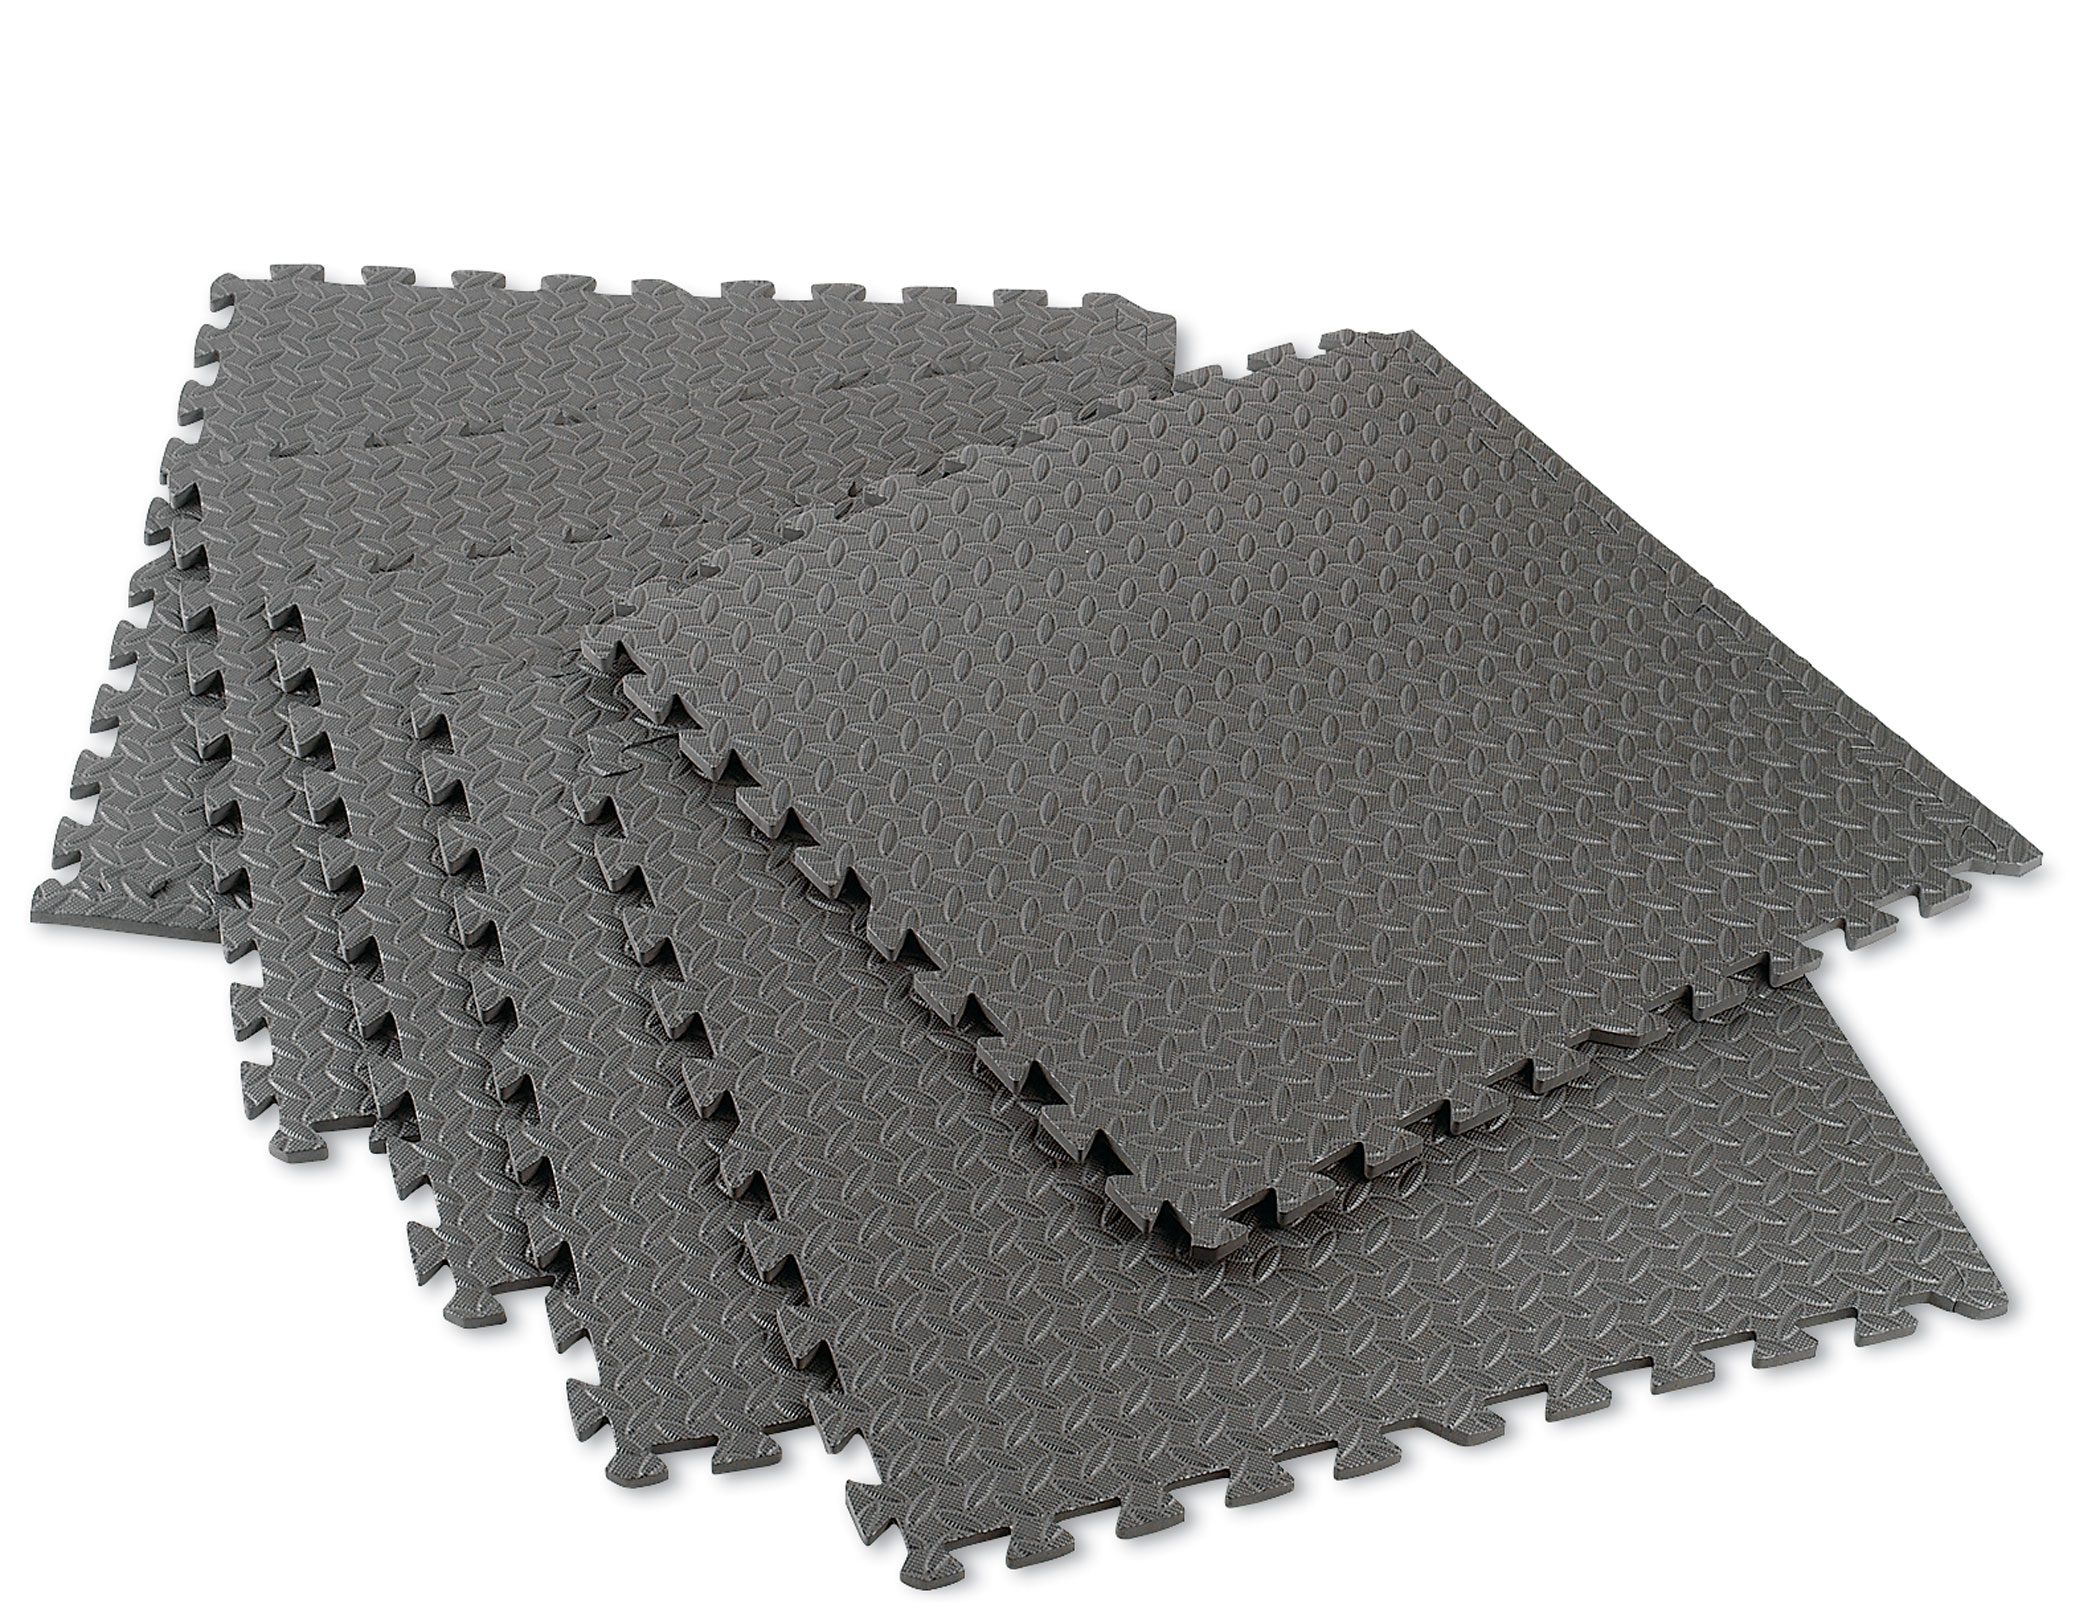 NORSK 2' x 2' Foam Flooring with Borders - 6-Pack | Shop Your Way